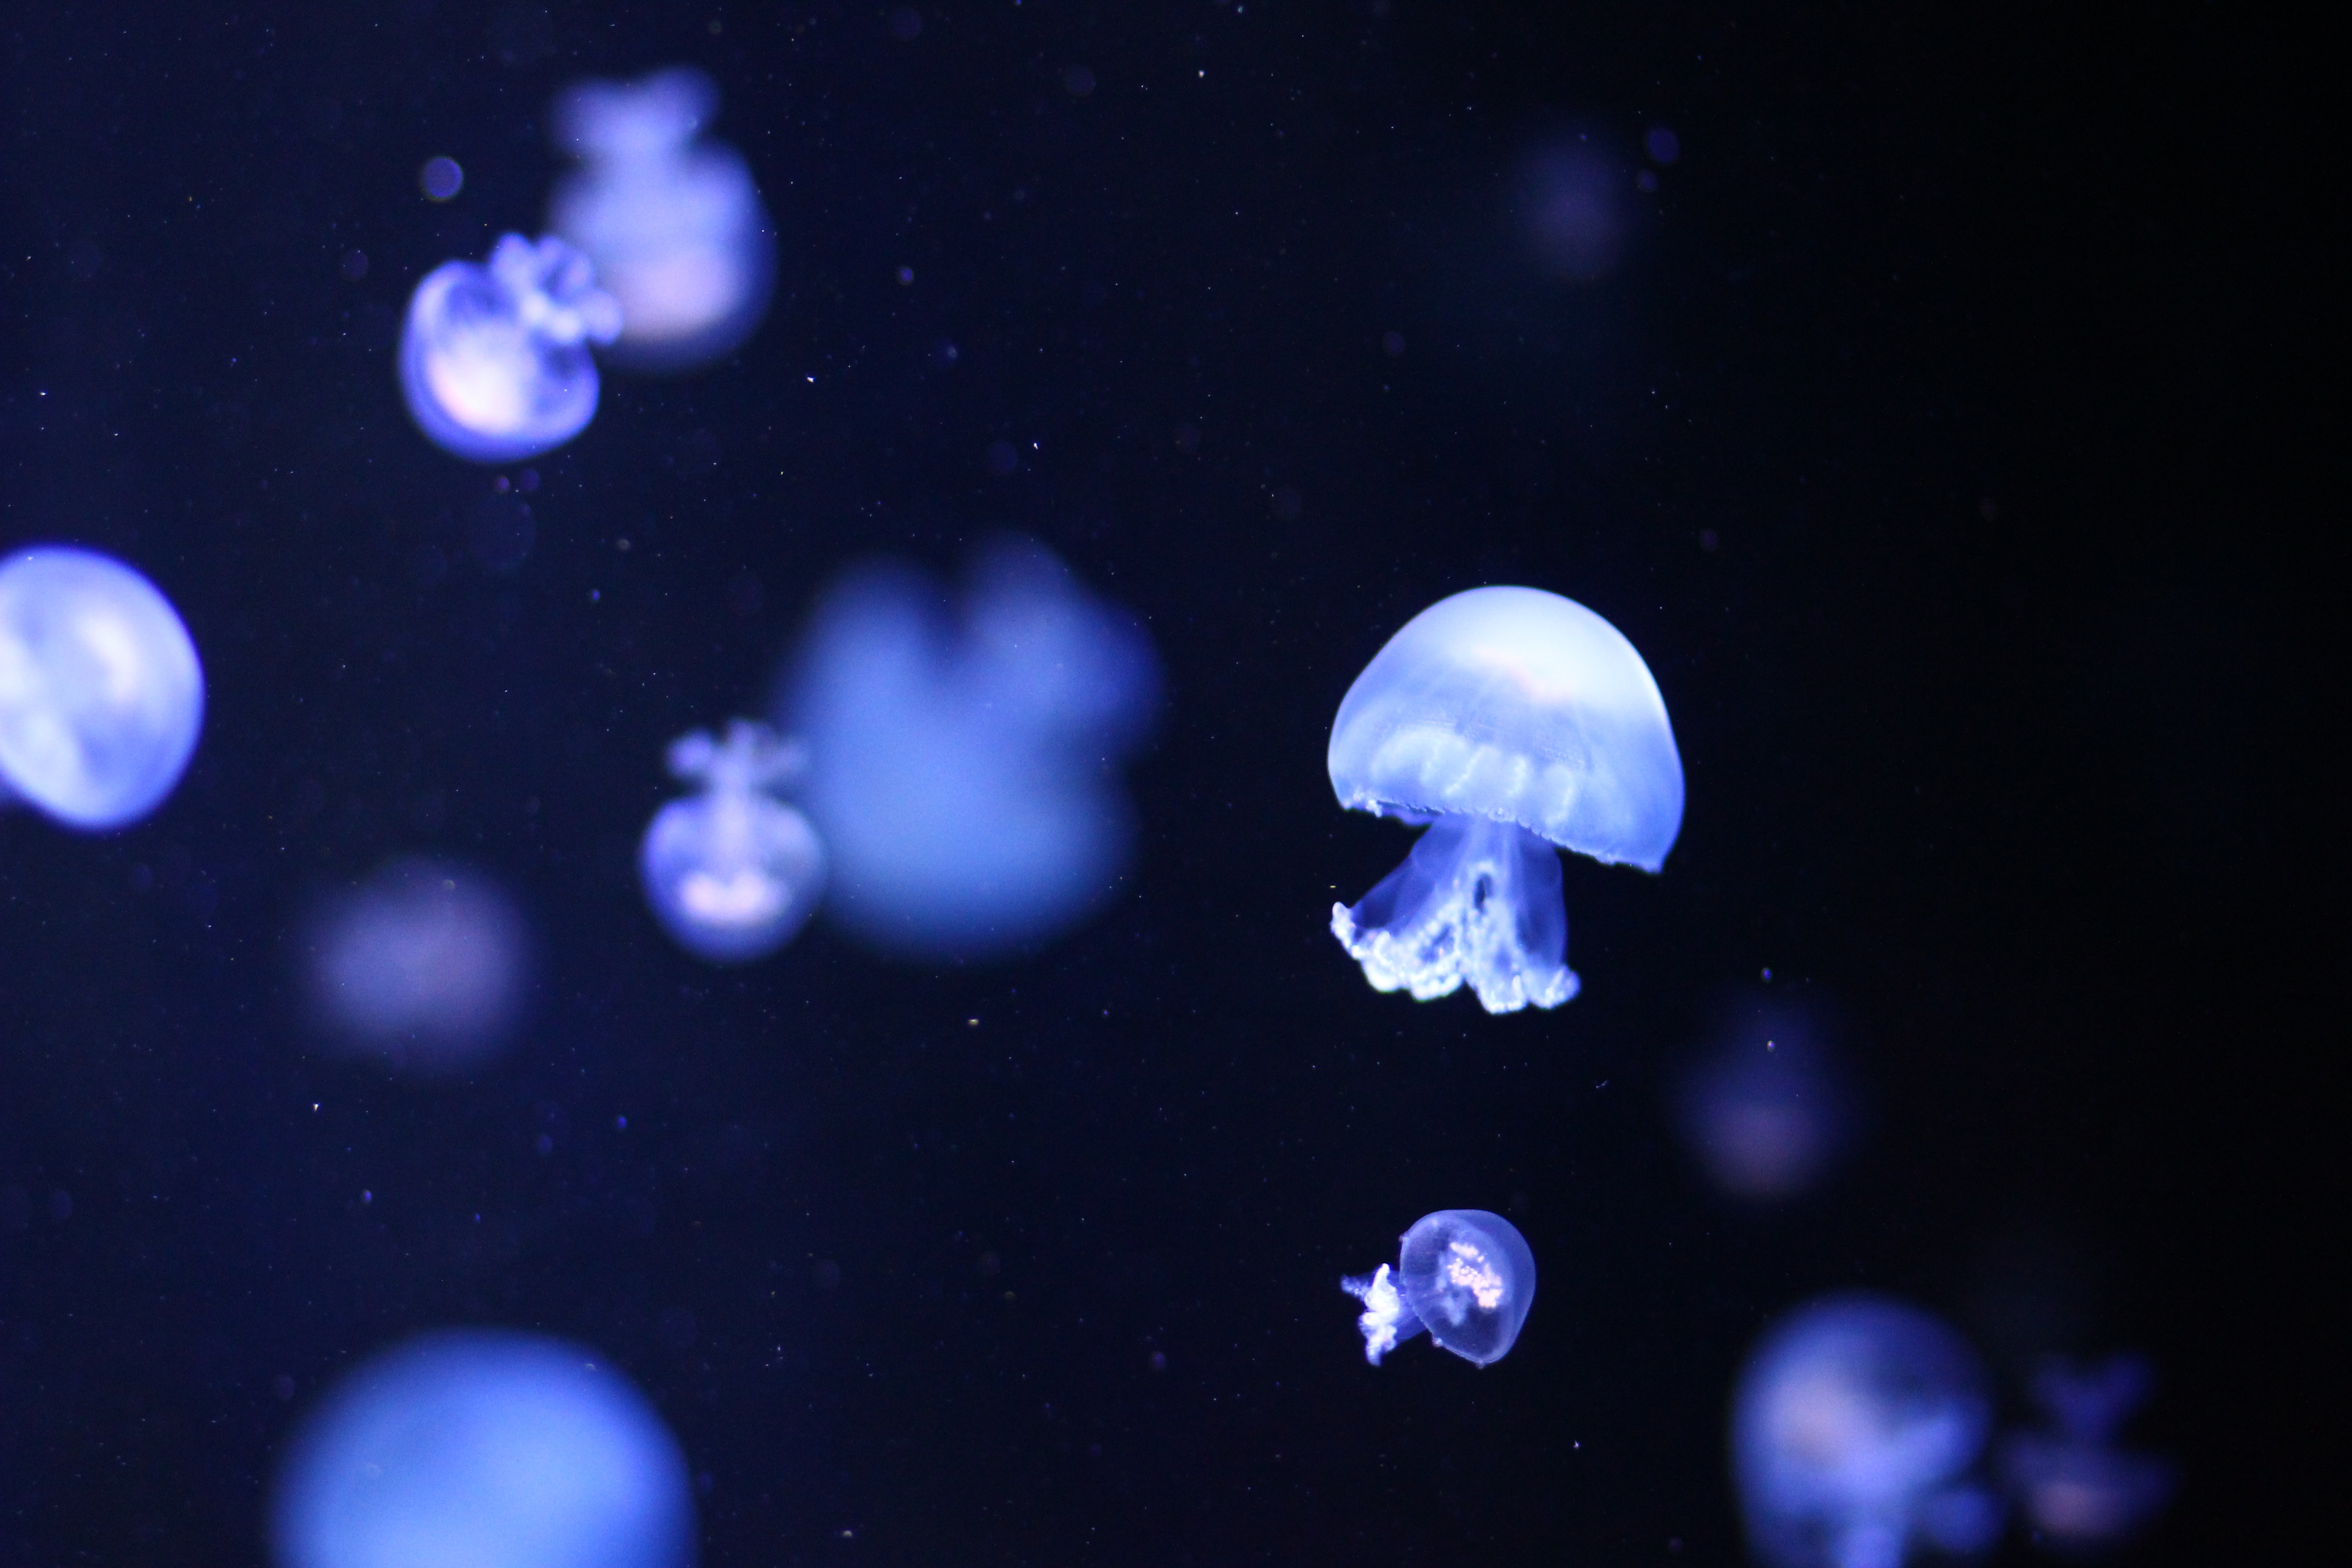 4272x2856 #smack, #Free , #tentacle, #ghost, #bag, #white, #water, #underwater, #ocean, #drift, #surface, #marine, #swarm, #bell, #transparent, #mouth, #gut, #float, #sea, #bloom, #jellyfish. Mocah HD Wallpaper